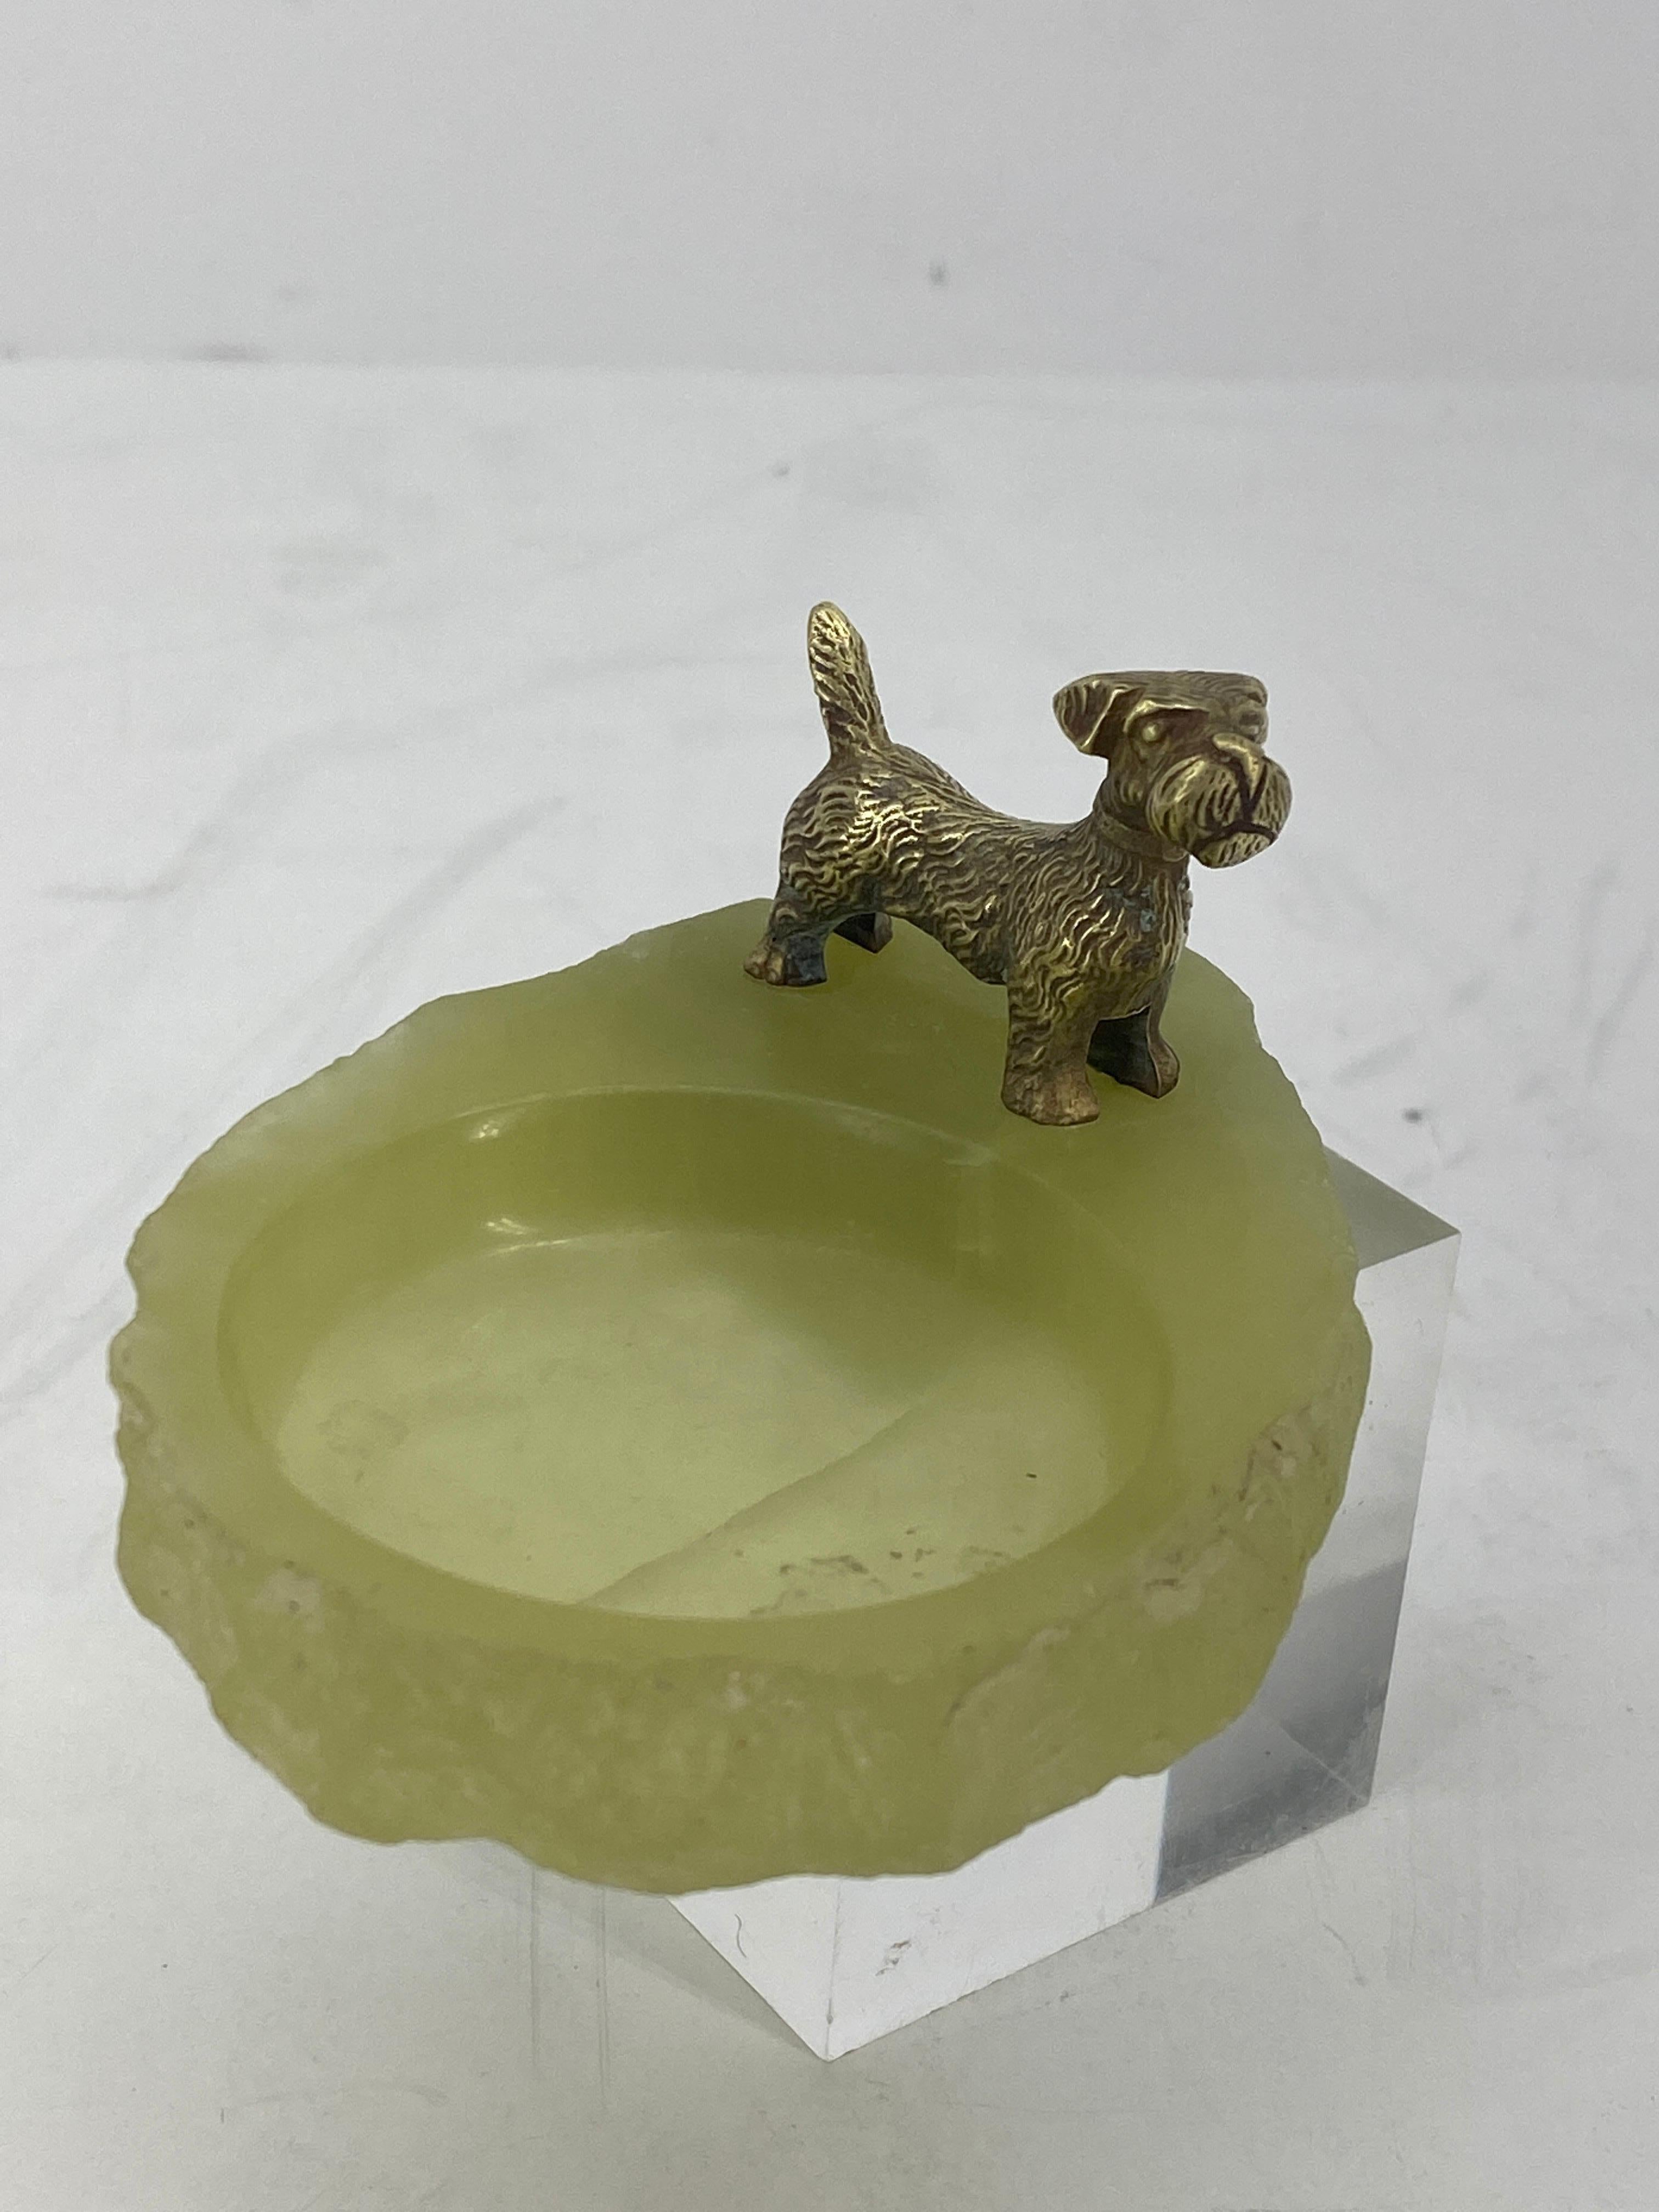 Pistachio Green Onyx and Bronze Terrier Ashtray or Jewelry Tray 11